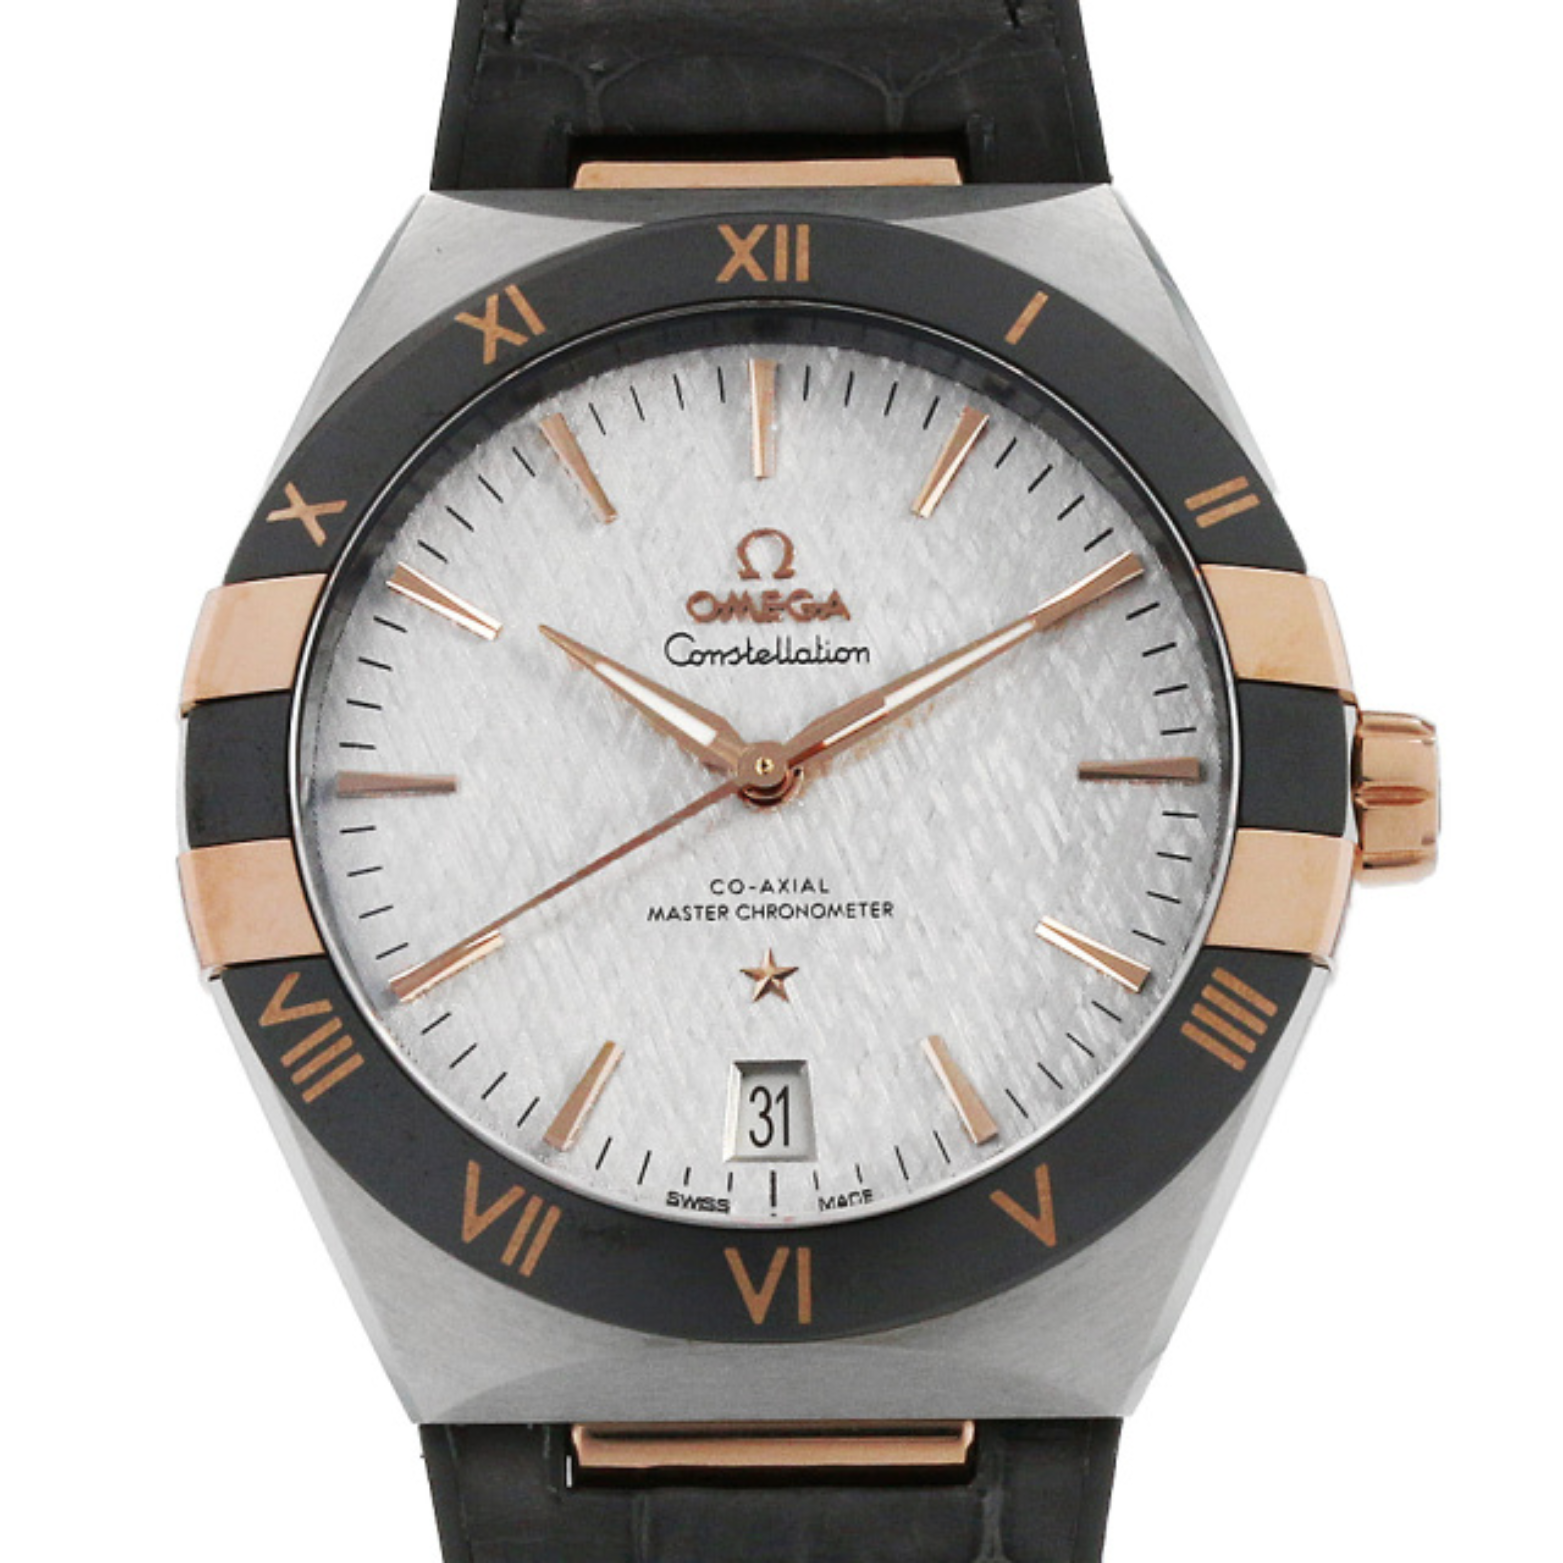 Omega Constellation Co-axial Master Chronometer 131.23.41.21.06.001